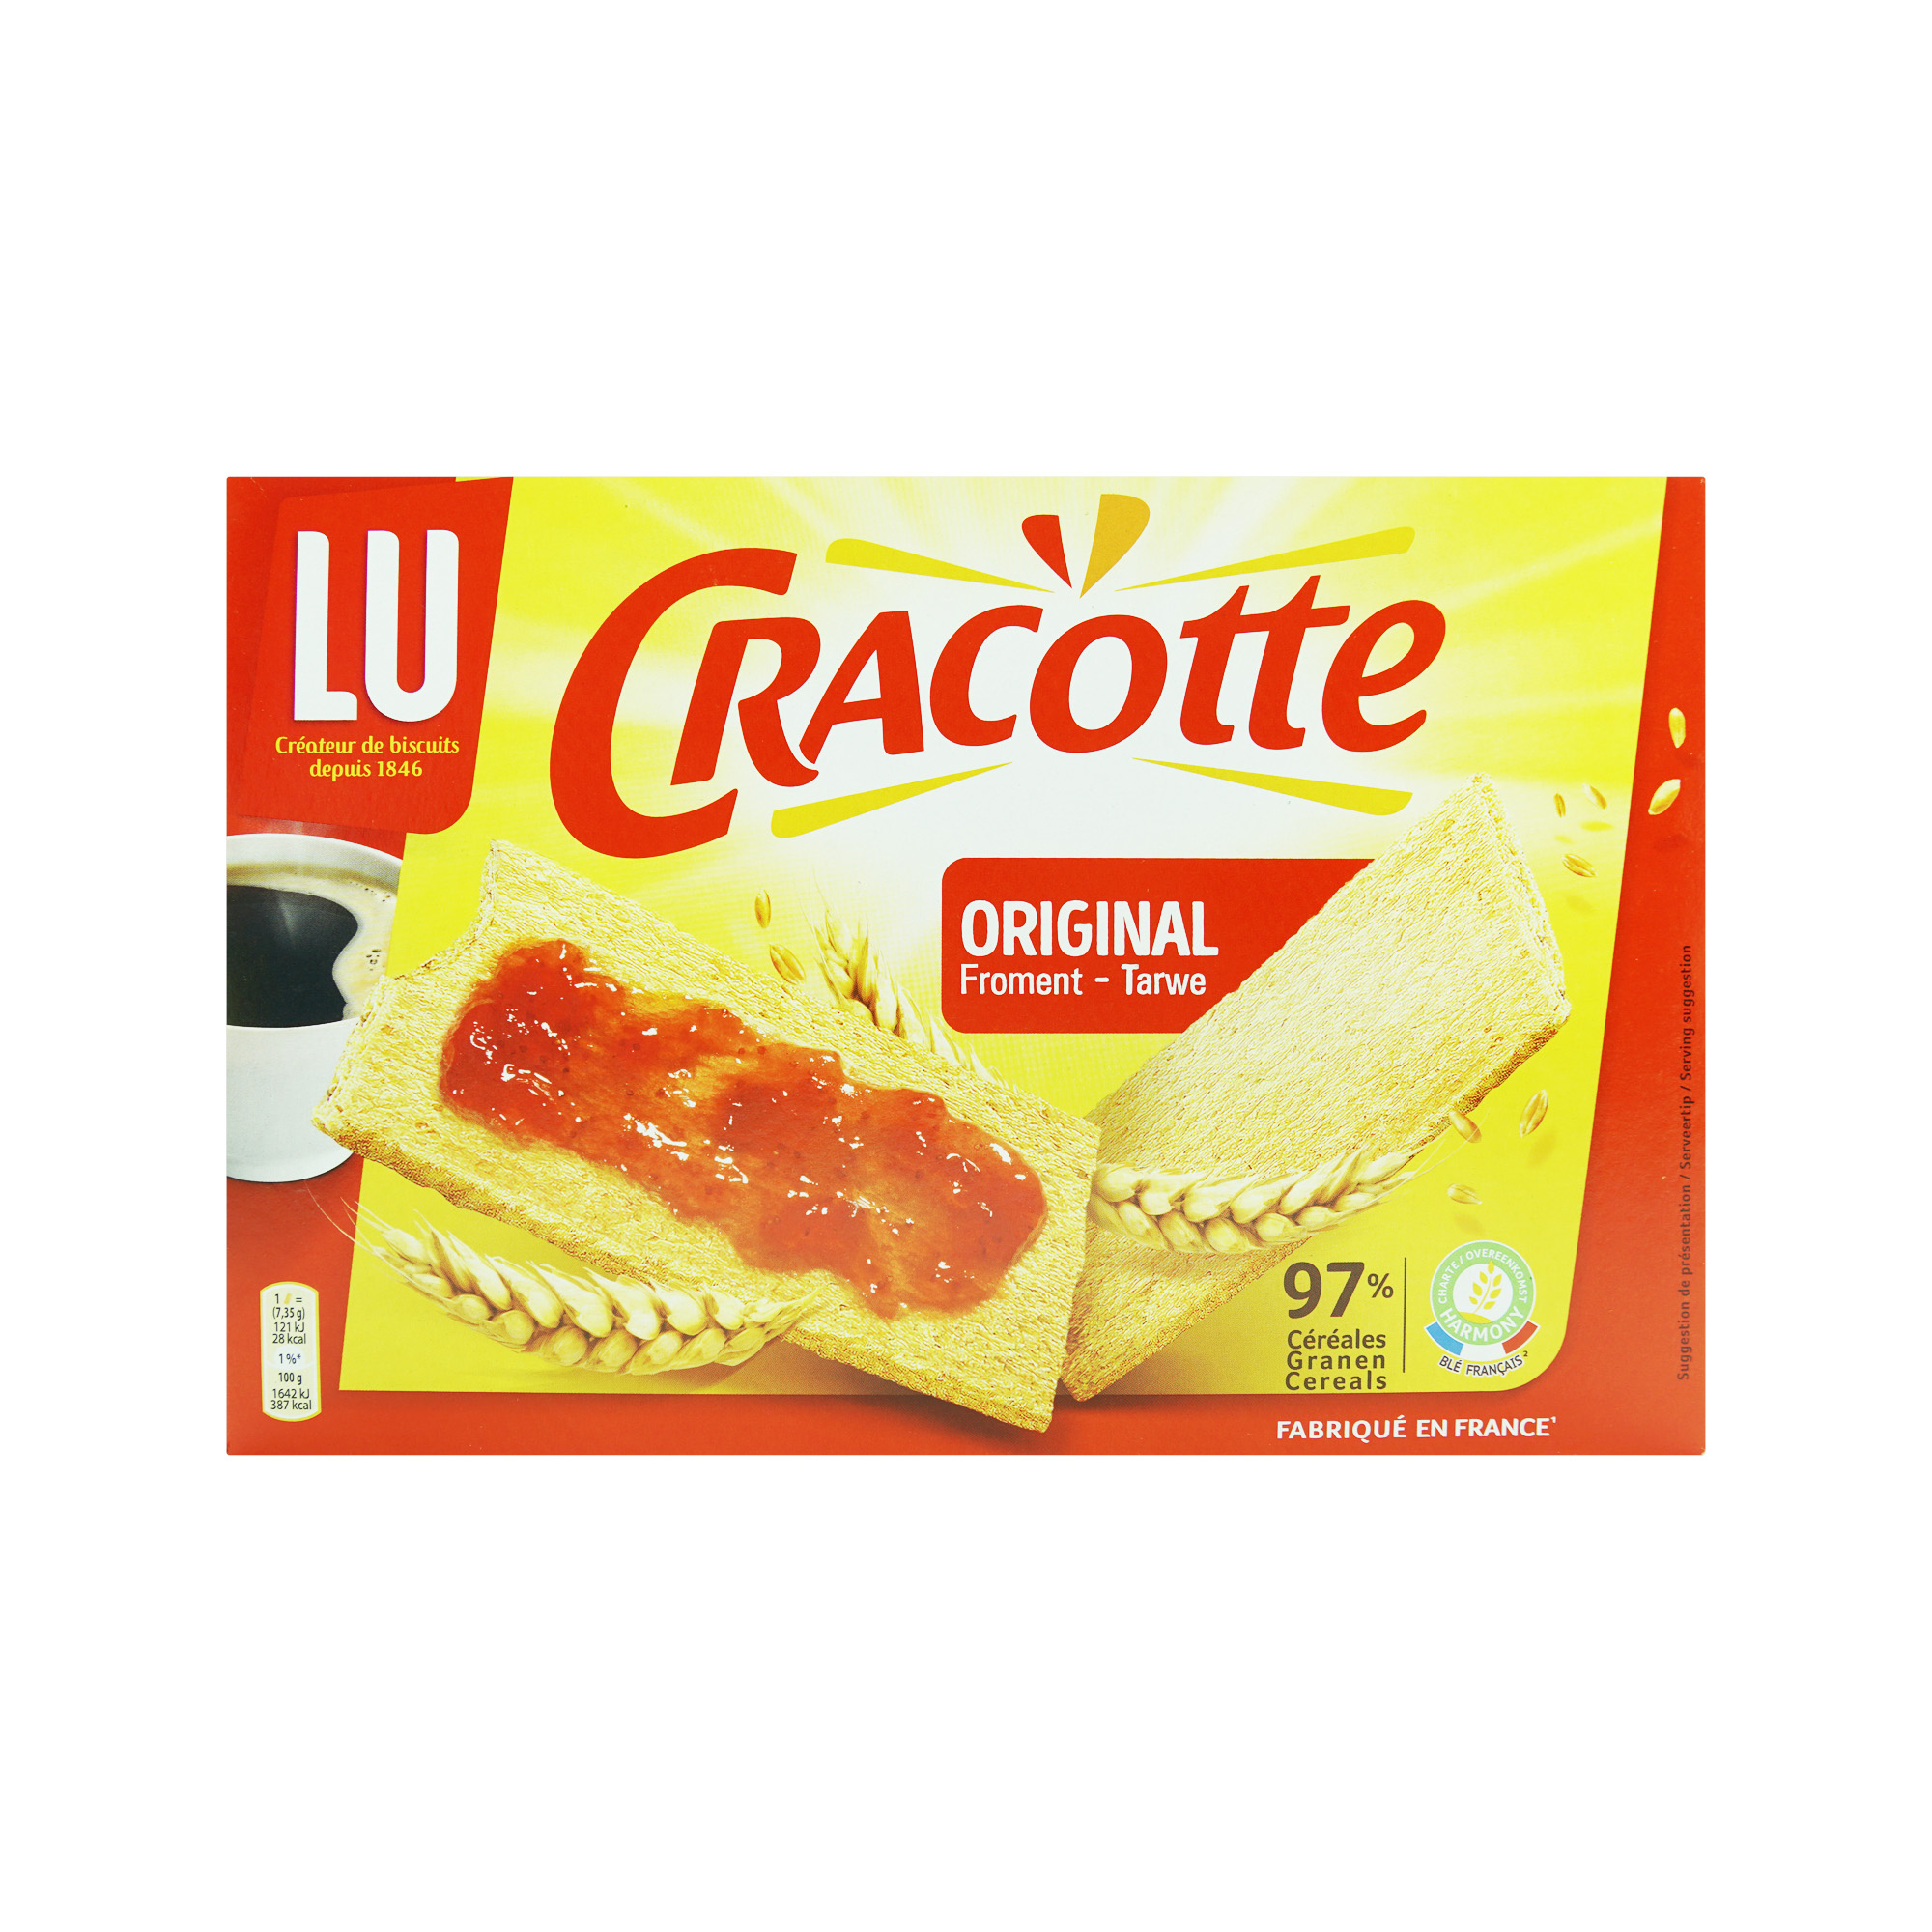 LU Cracotte Toast from Wheat (250g)